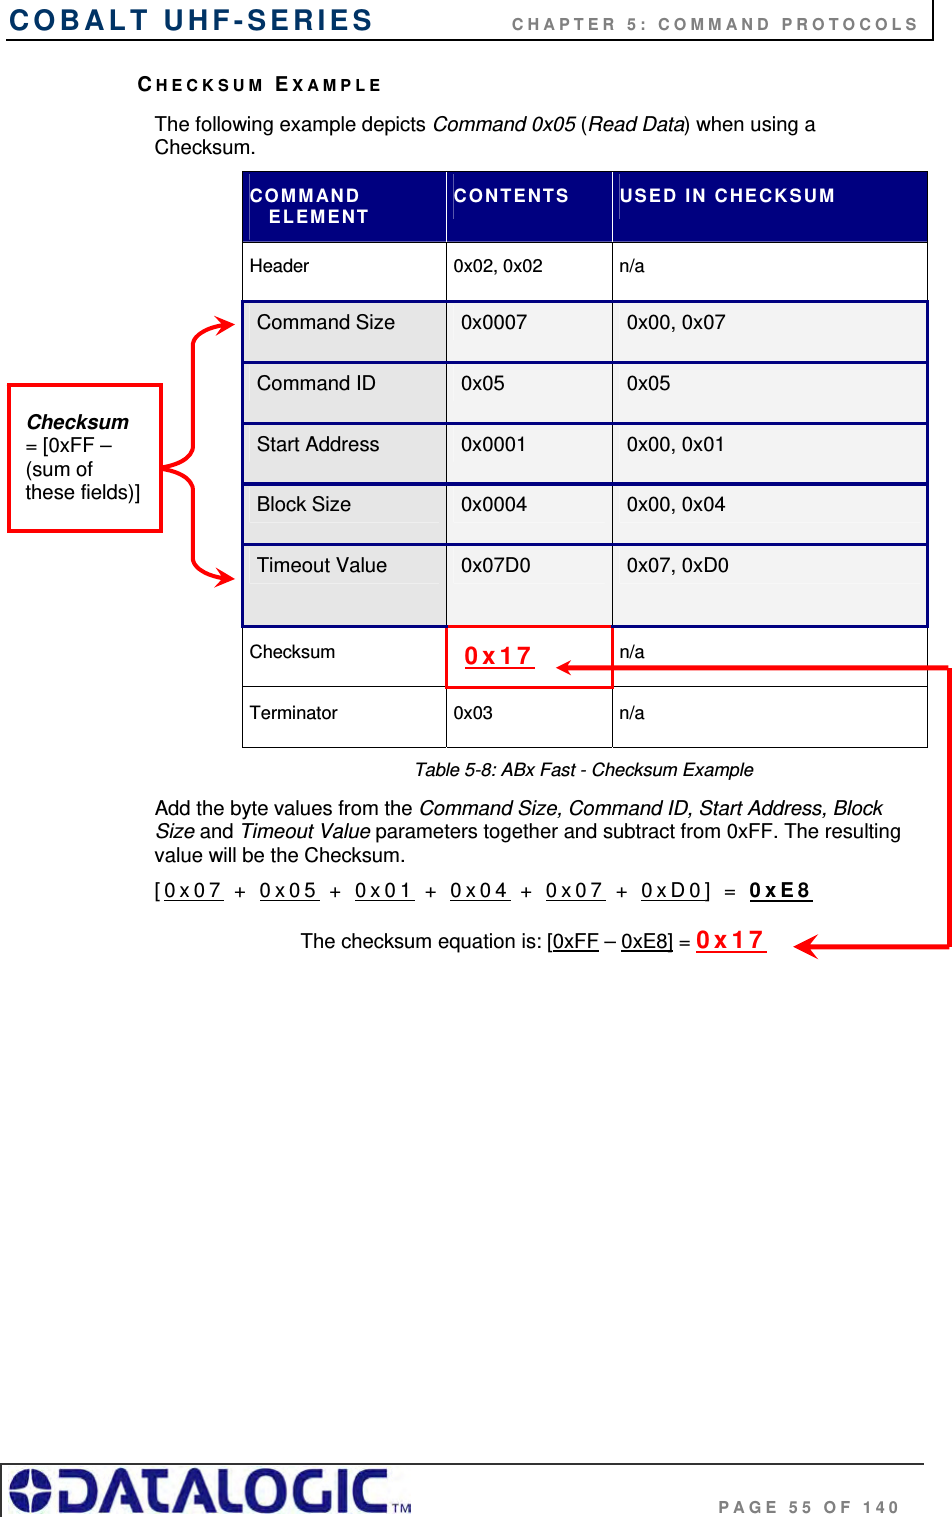 COBALT UHF-SERIES    CHAPTER 5: COMMAND PROTOCOLS                                     PAGE 55 OF 140 CHECKSUM EXAMPLE The following example depicts Command 0x05 (Read Data) when using a Checksum. COMMAND ELEMENT CONTENTS  USED IN CHECKSUM Header 0x02, 0x02 n/a Command Size  0x0007  0x00, 0x07 Command ID  0x05  0x05 Start Address  0x0001  0x00, 0x01 Block Size  0x0004  0x00, 0x04 Timeout Value  0x07D0  0x07, 0xD0 Checksum   0x17 n/a Terminator 0x03  n/a Table 5-8: ABx Fast - Checksum Example Add the byte values from the Command Size, Command ID, Start Address, Block Size and Timeout Value parameters together and subtract from 0xFF. The resulting value will be the Checksum. [0x07 + 0x05 + 0x01 + 0x04 + 0x07 + 0xD0] = 0xE8  The checksum equation is: [0xFF – 0xE8] = 0x17             Checksum = [0xFF – (sum of these fields)] 